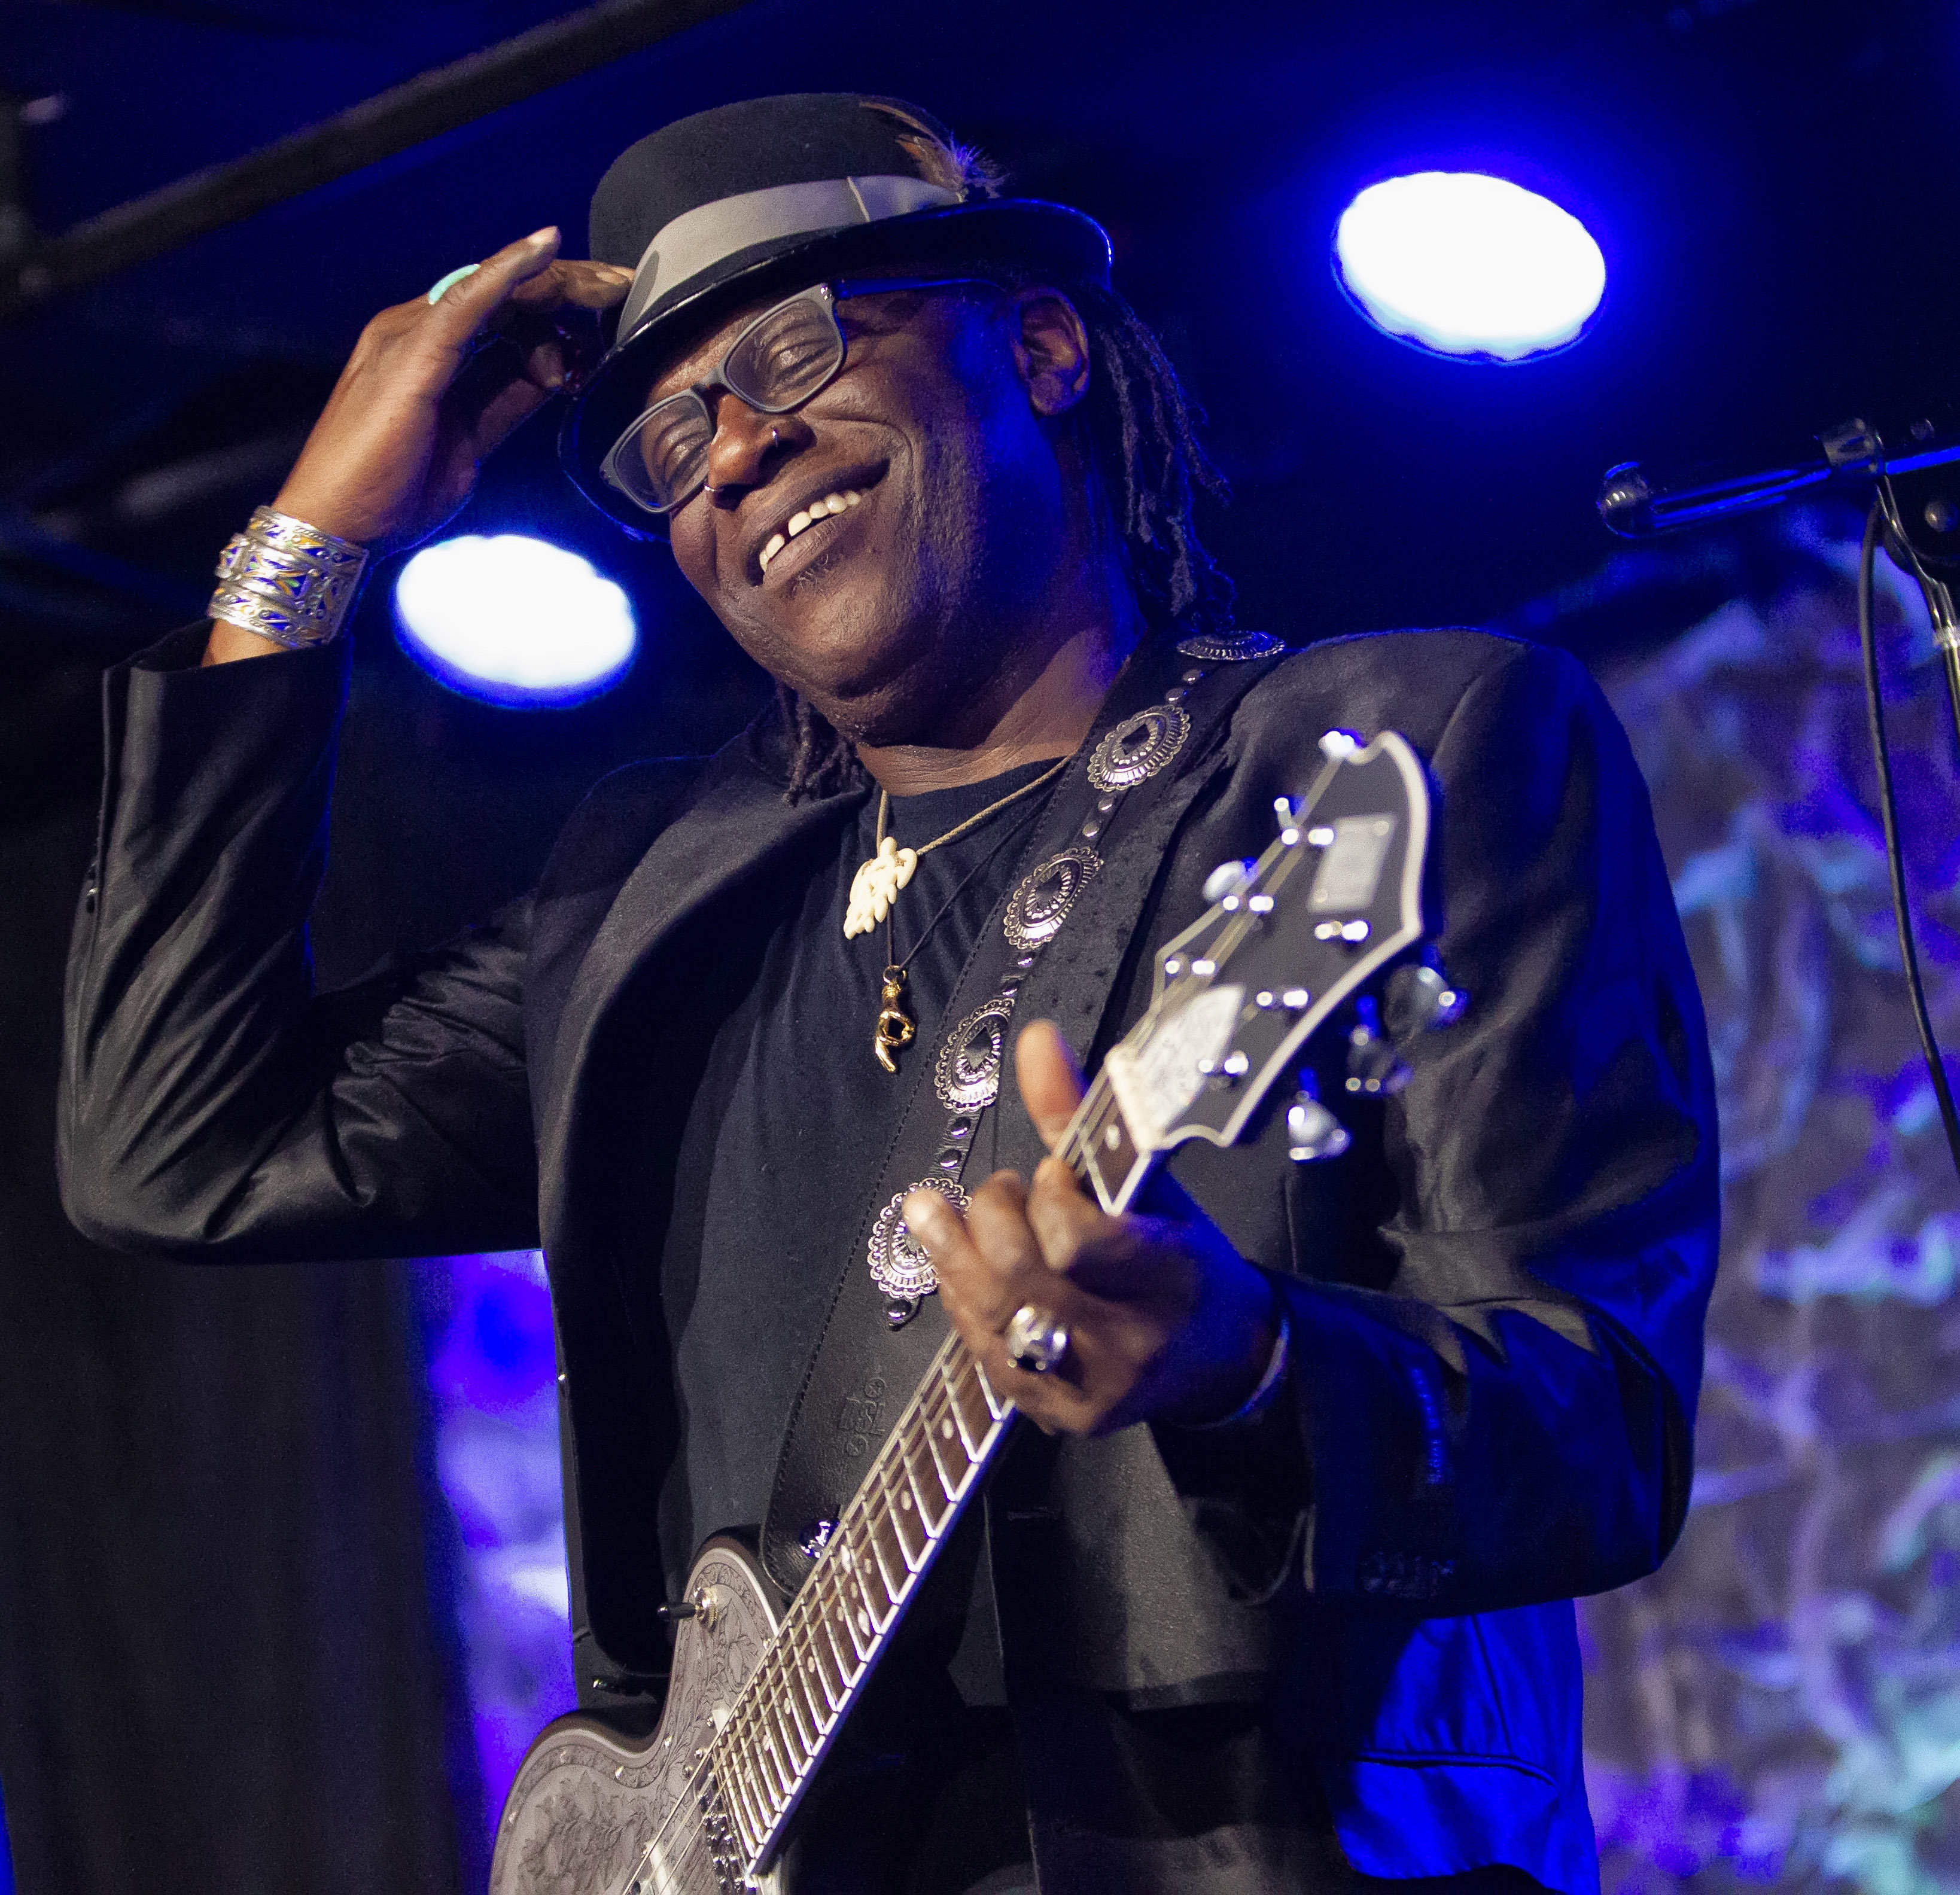 Iconic Bluesman Joe Louis Walker Signs With Forty Below Records - New Music to be Released Fall 2022